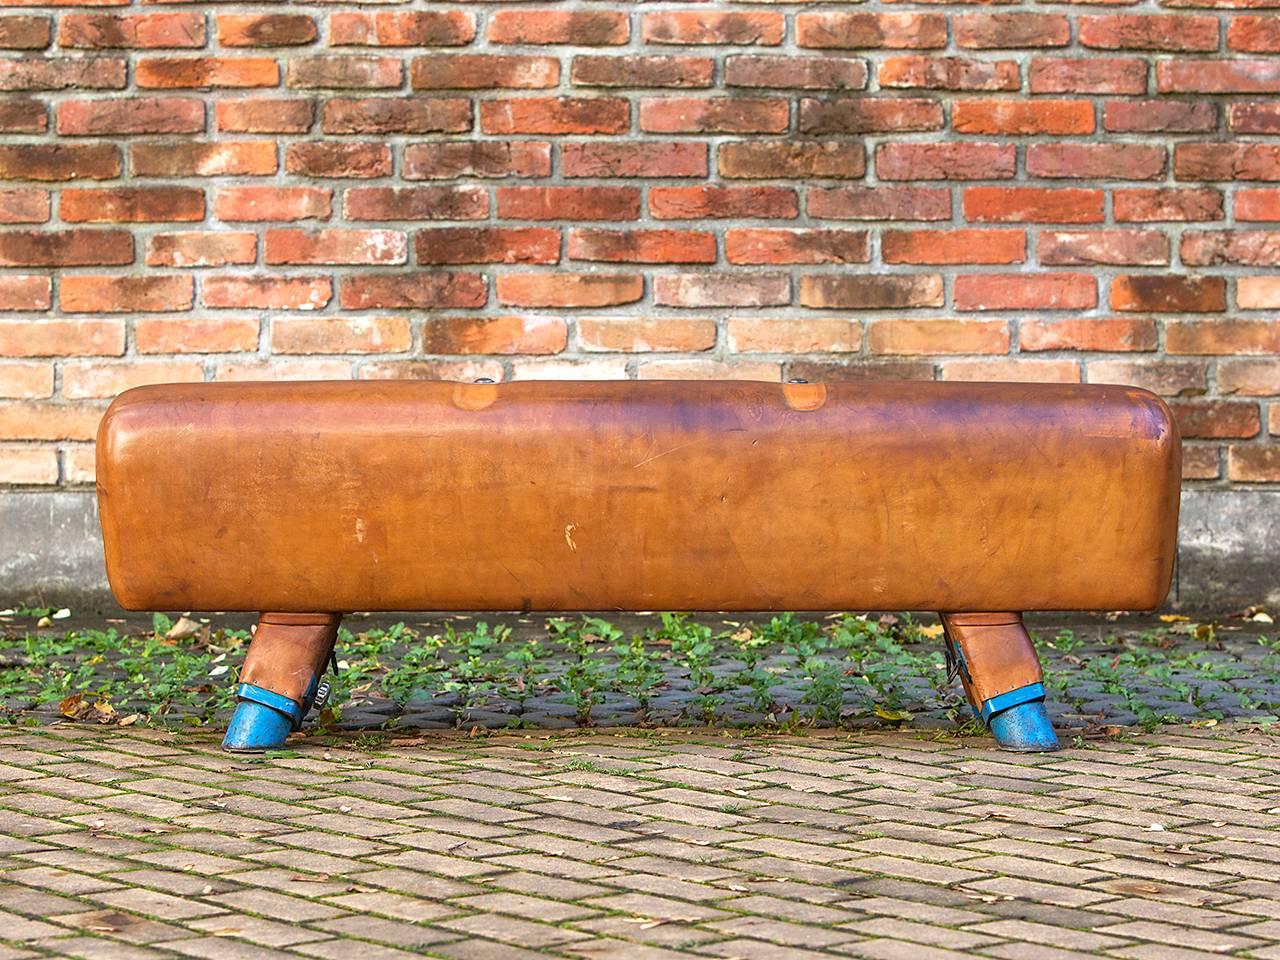 Pommel horse from former Czechoslovakia.
The legs were cut to a height of 55cm. The handles can be removed for comfortable seating. The wooden handles were restored. The thick leather has been cleaned and the patina was retained.
         